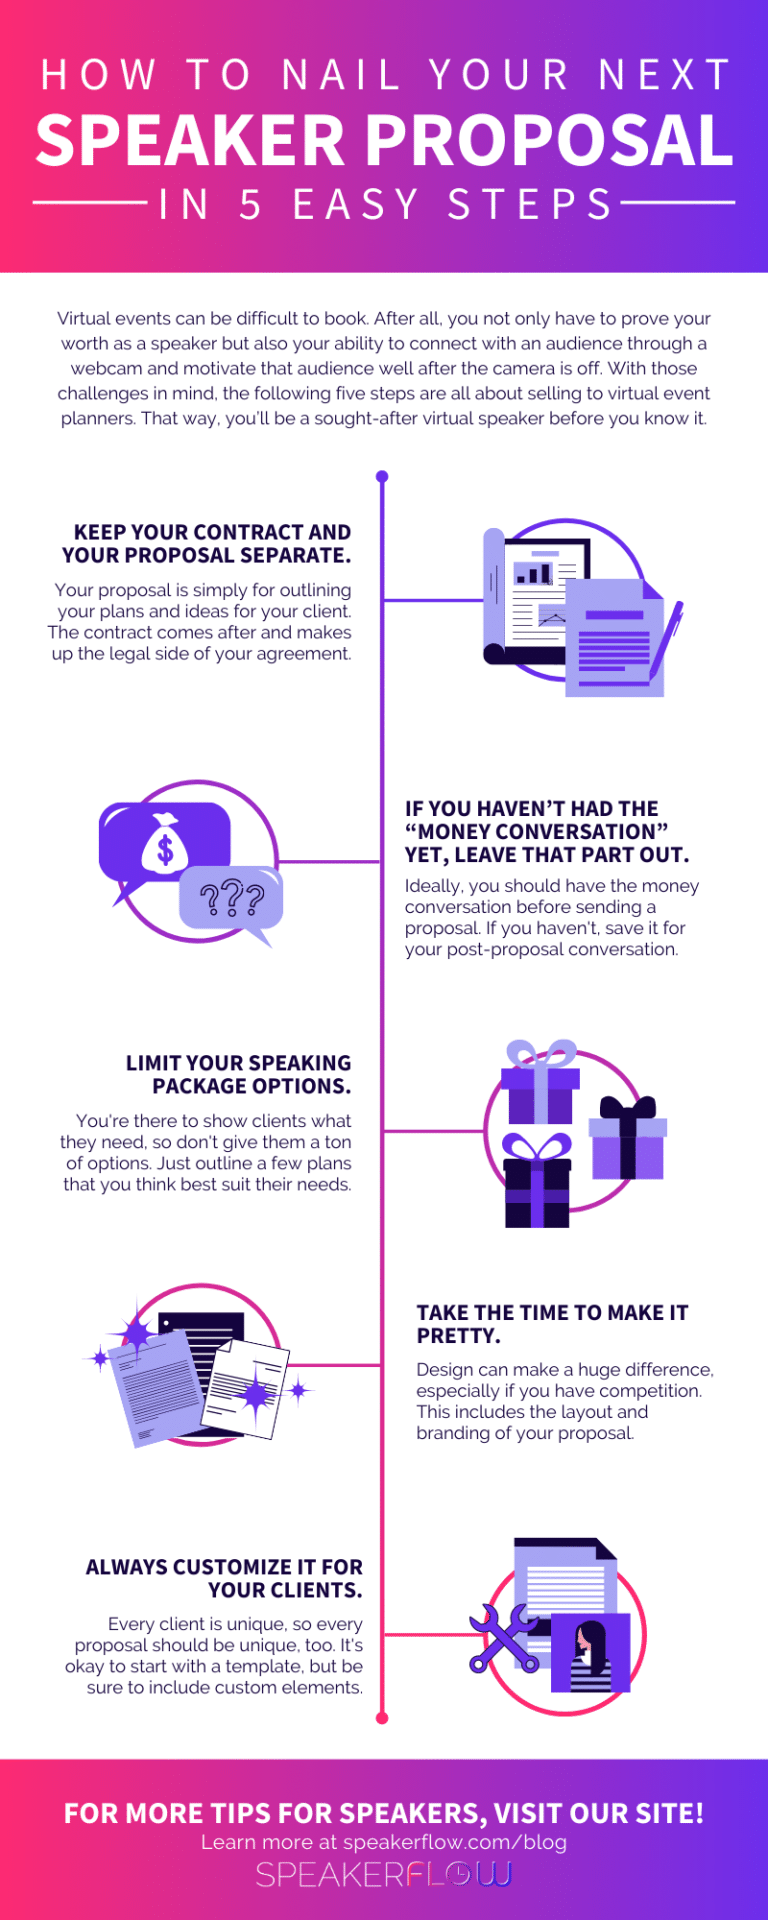 How To Nail Your Next Speaker Proposal In 5 Easy Steps